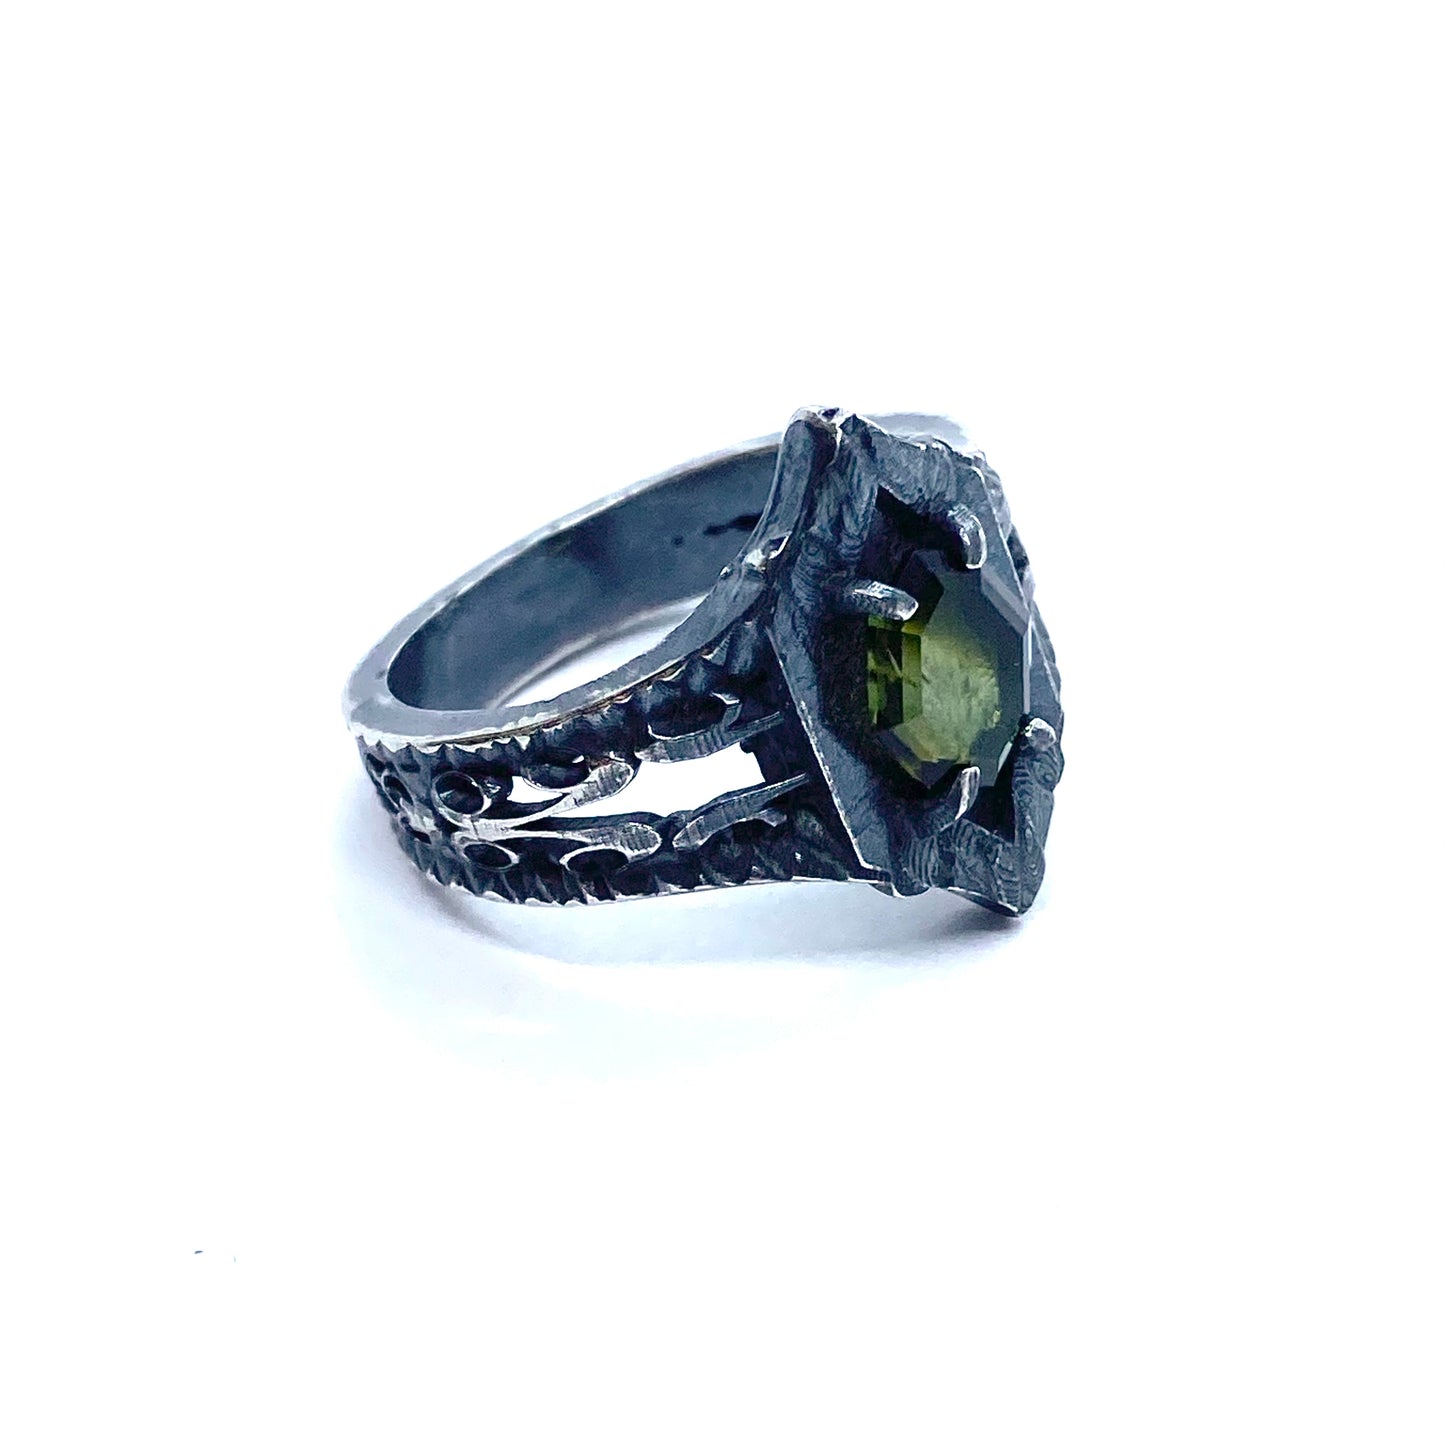 Serpent’s Claw with Green Tourmaline in Sterling Silver